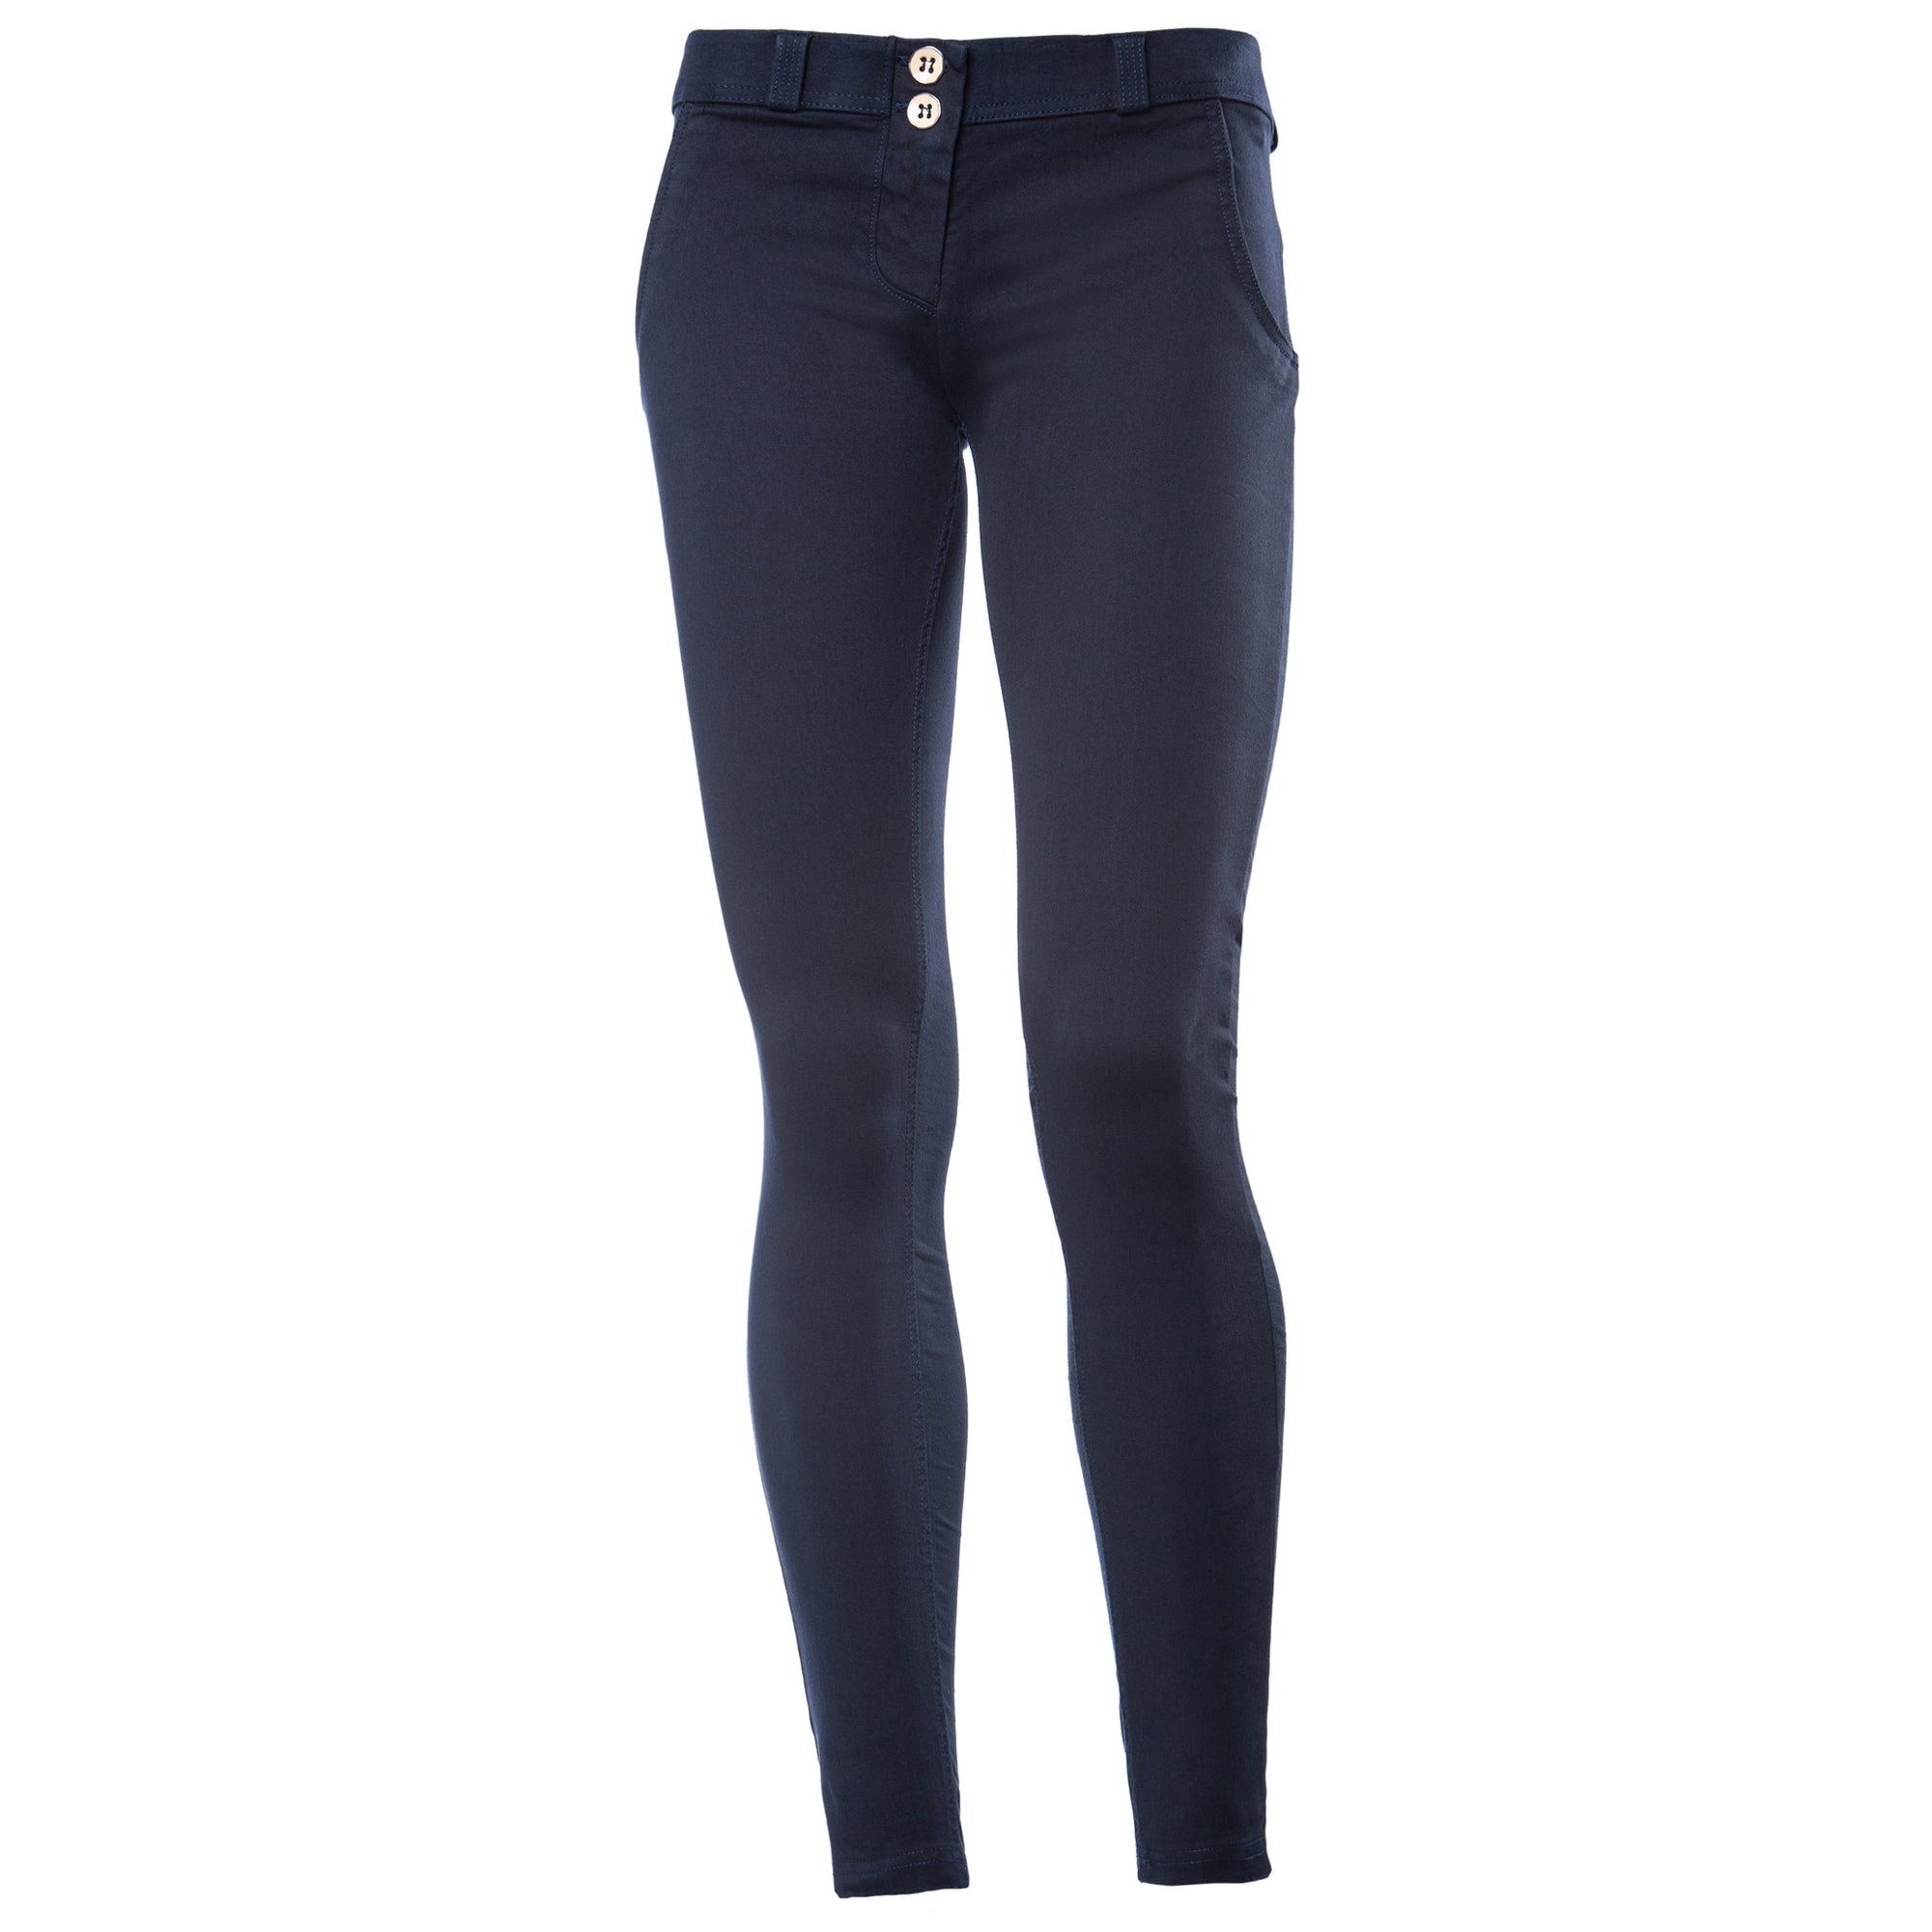 FREDDY TWILL FRONT WR.UP PANT - Navy - LIVIFY
 - 2